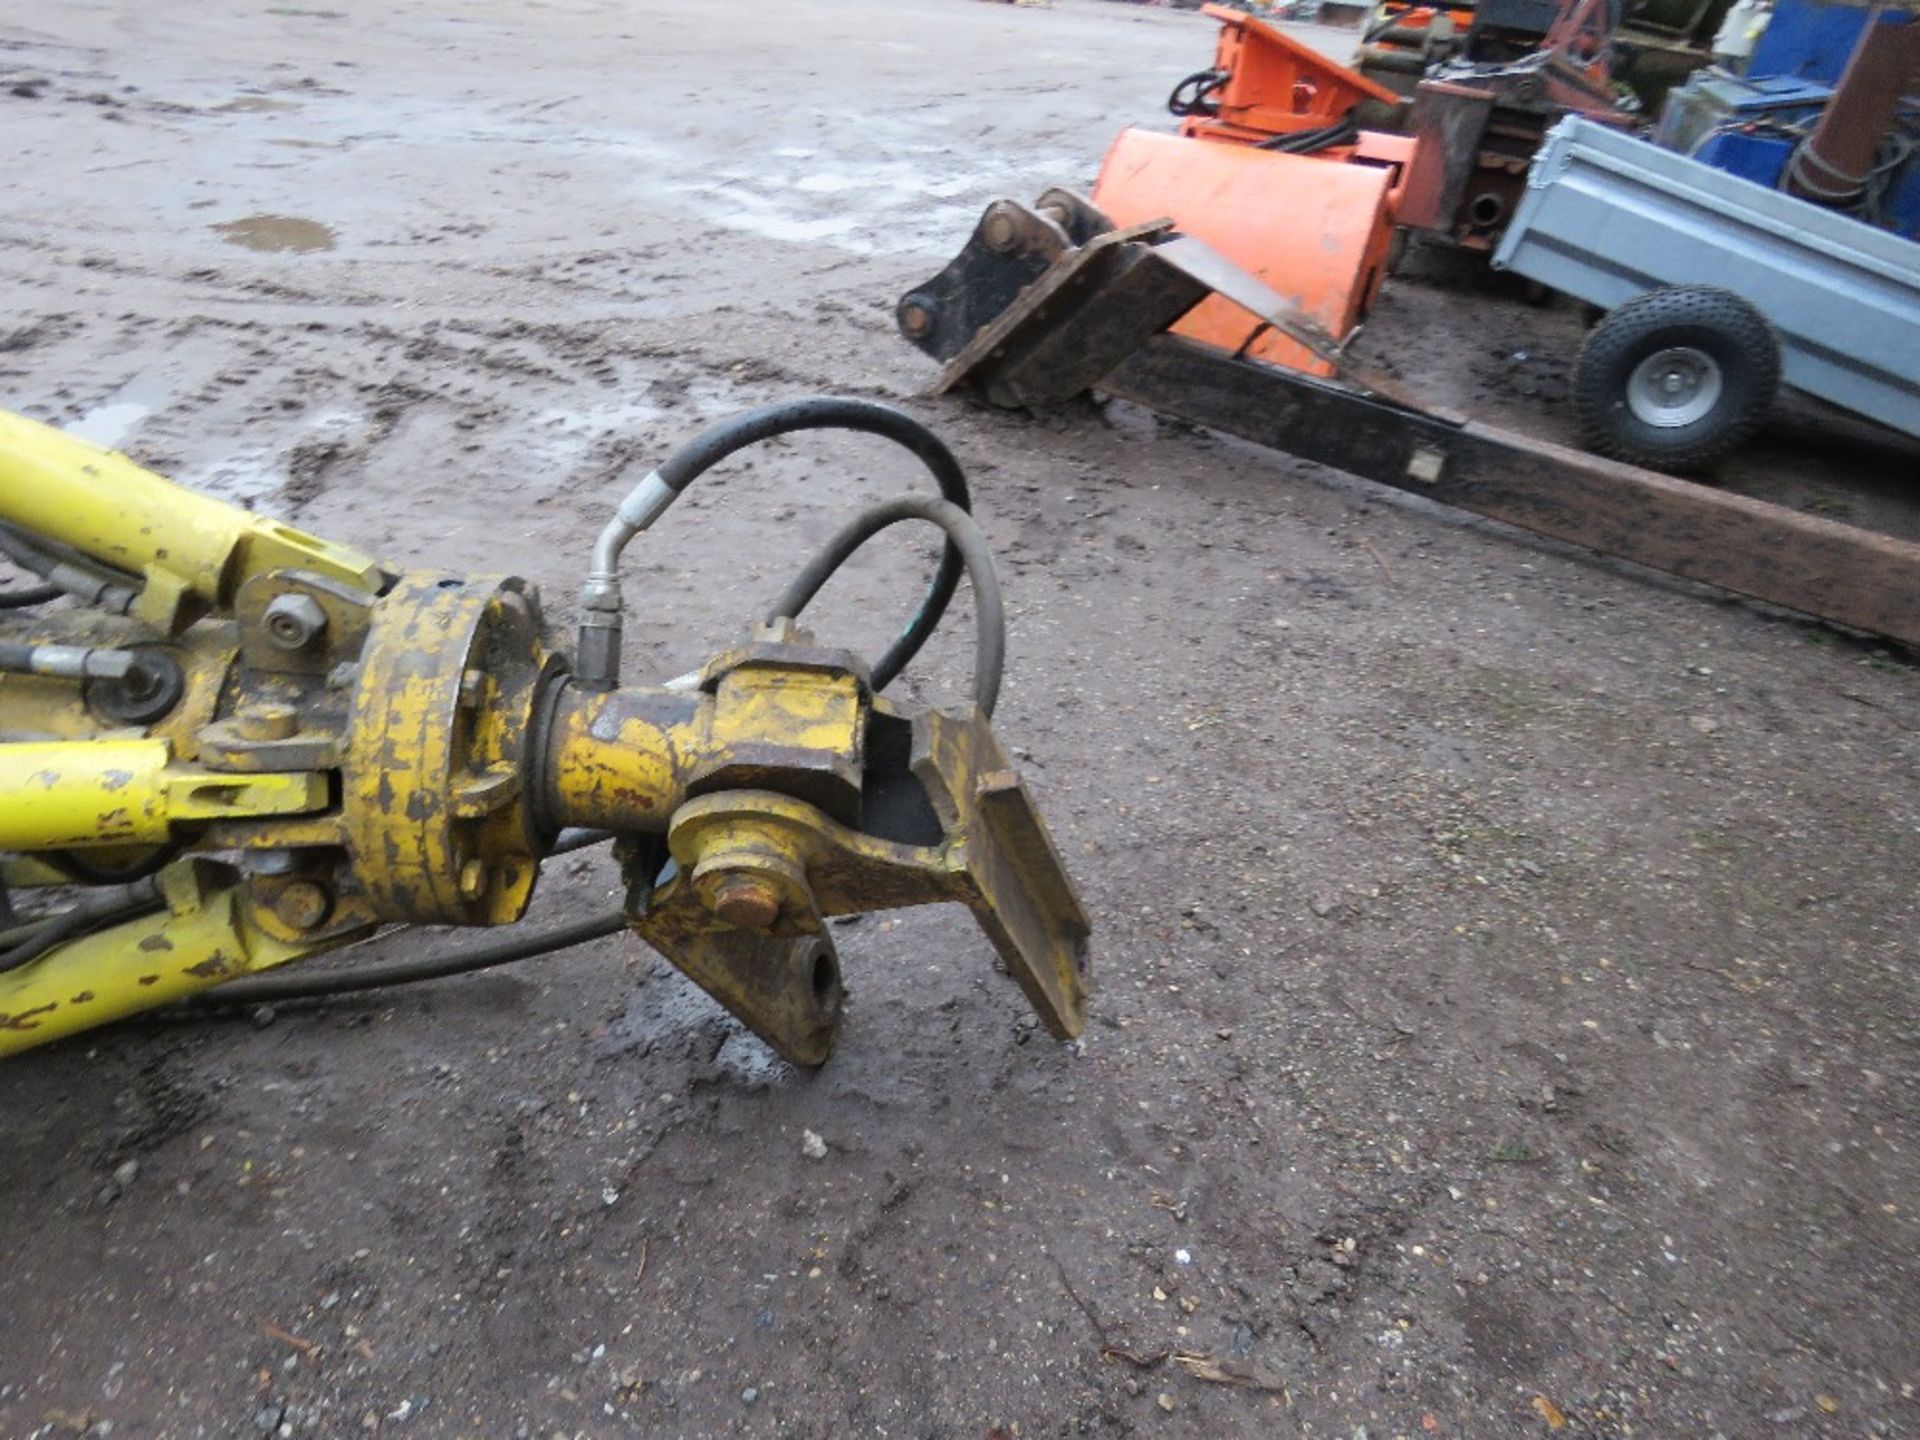 EXCAVATOR MOUNTED 5 TINE SCRAP GRAB WITH ROTATOR ON 65MM PINS, RAMS DONE LITTLE WORK SINCE REFURBISH - Image 4 of 6